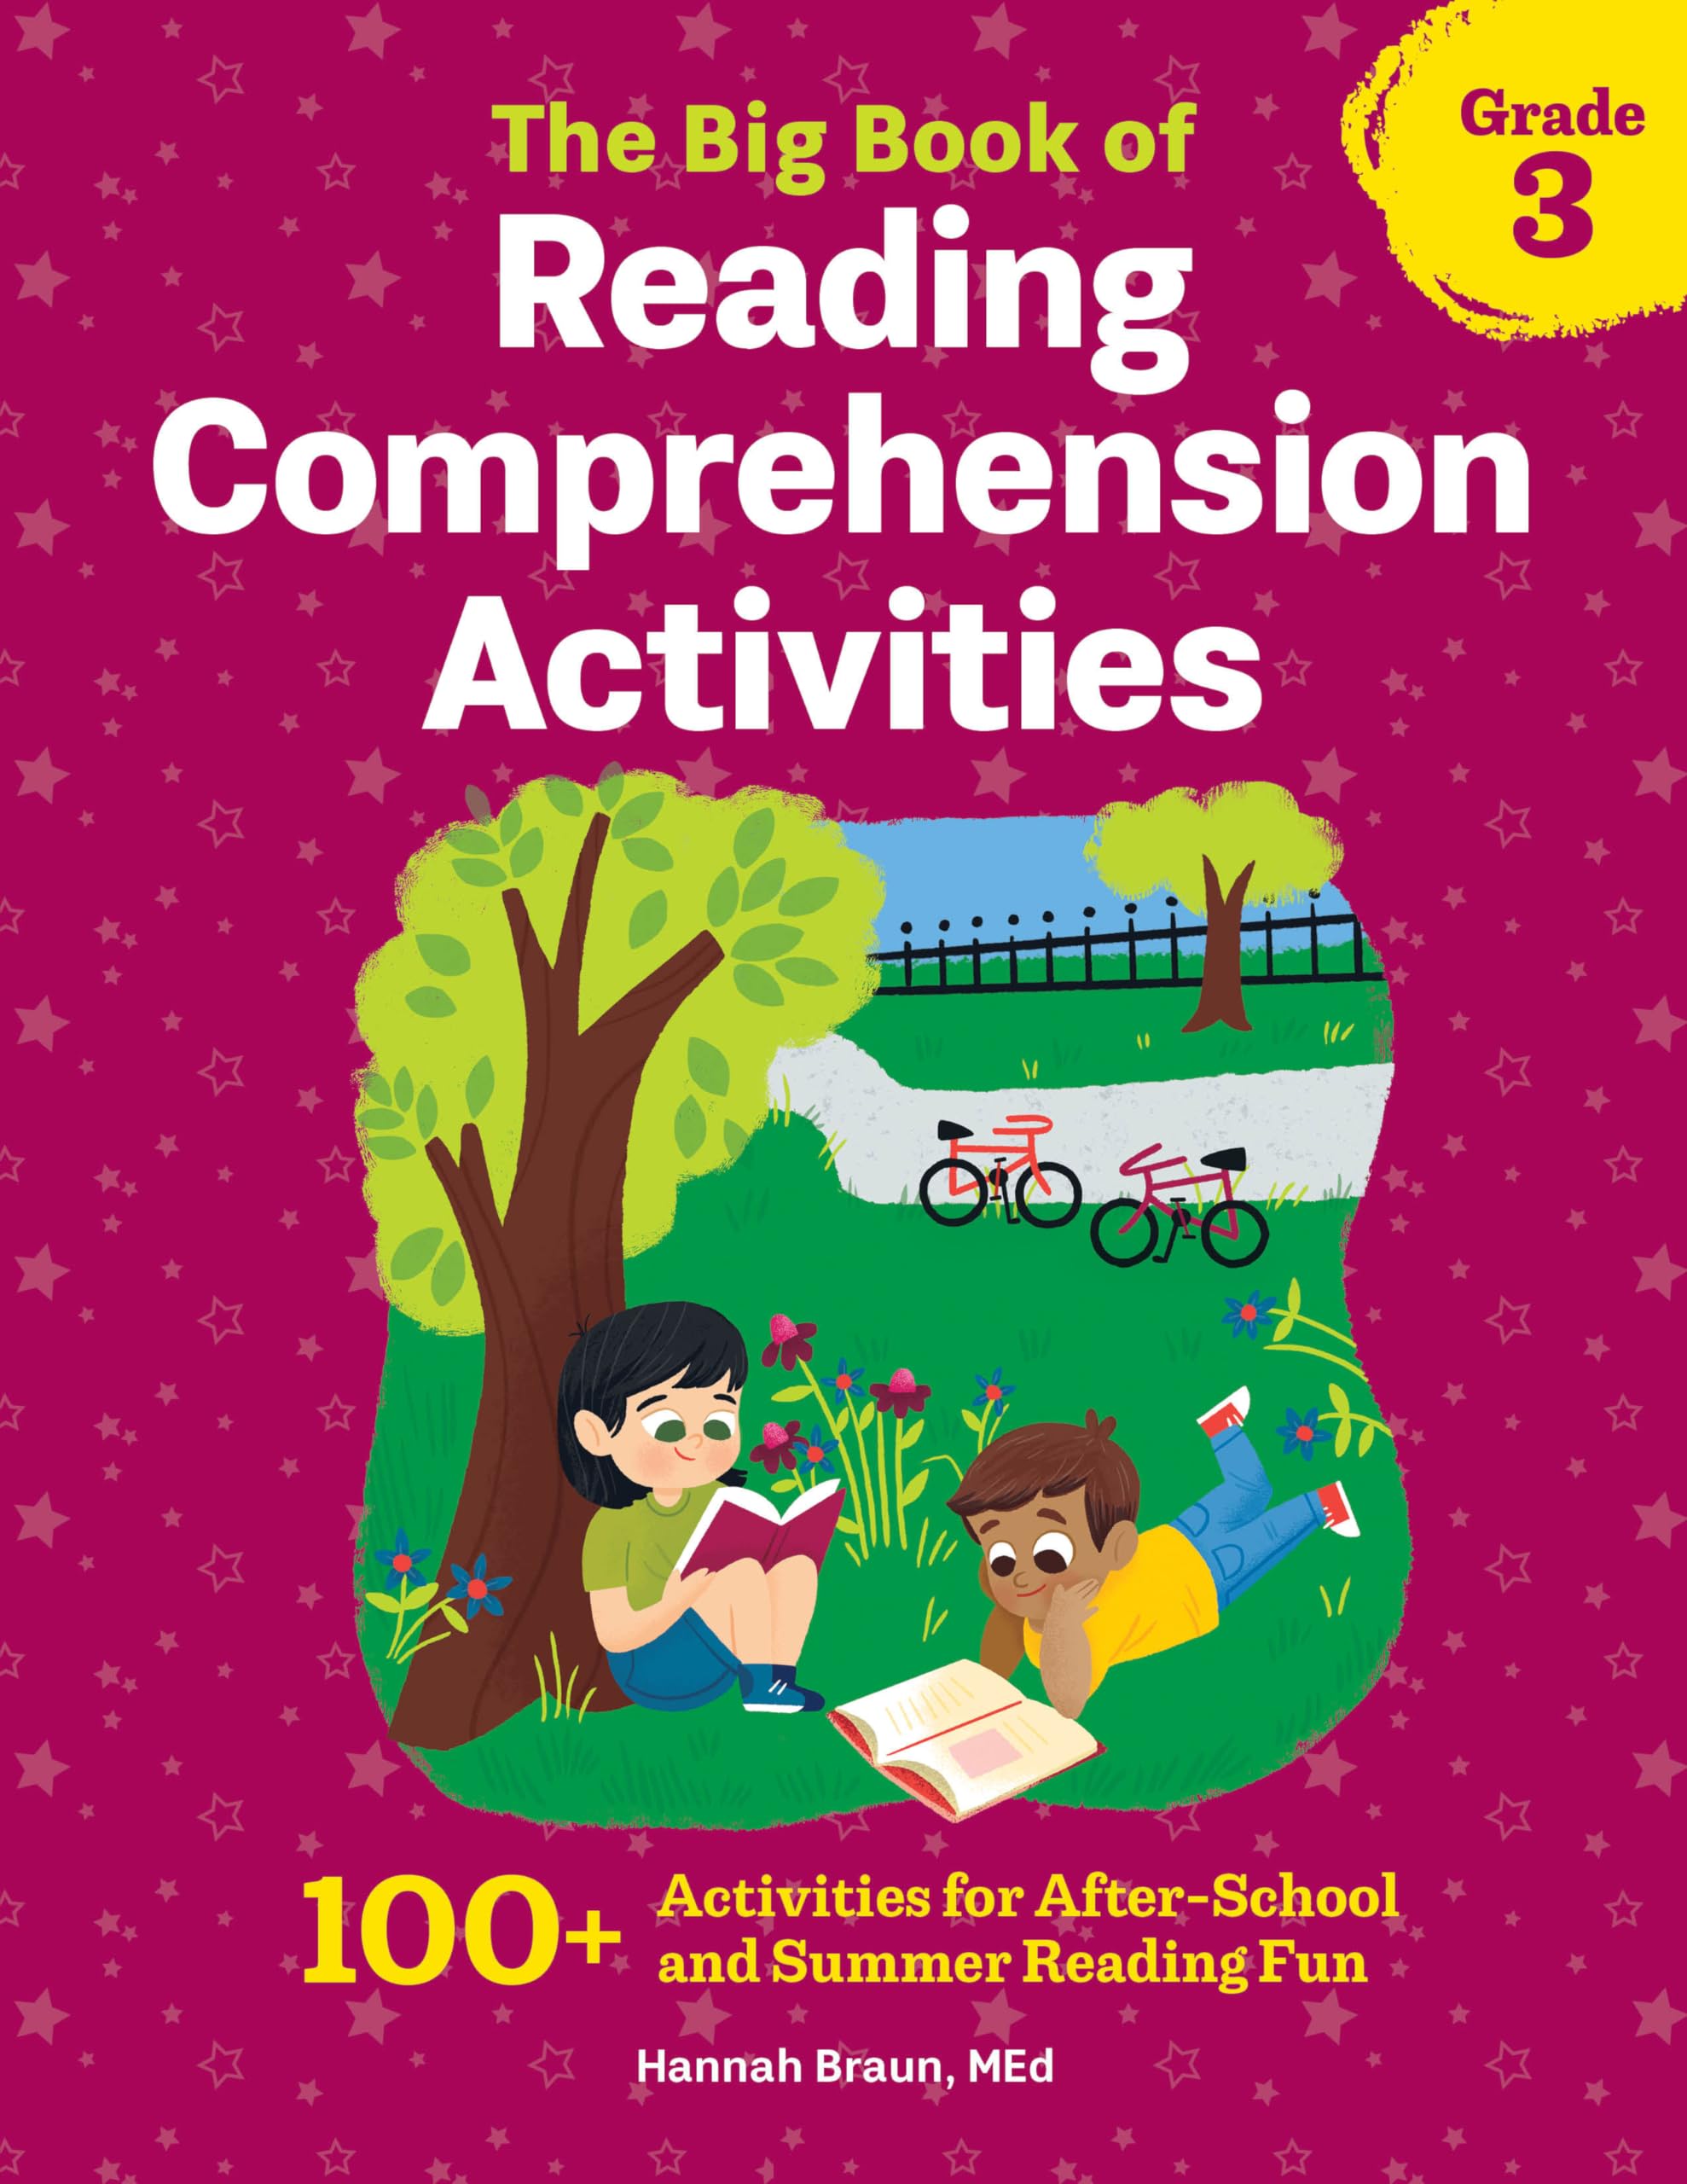 The Big Book of Reading Comprehension Activities, Grade 3: 100+ Activities for After-School and Summer Reading Fun by Braun, Hannah